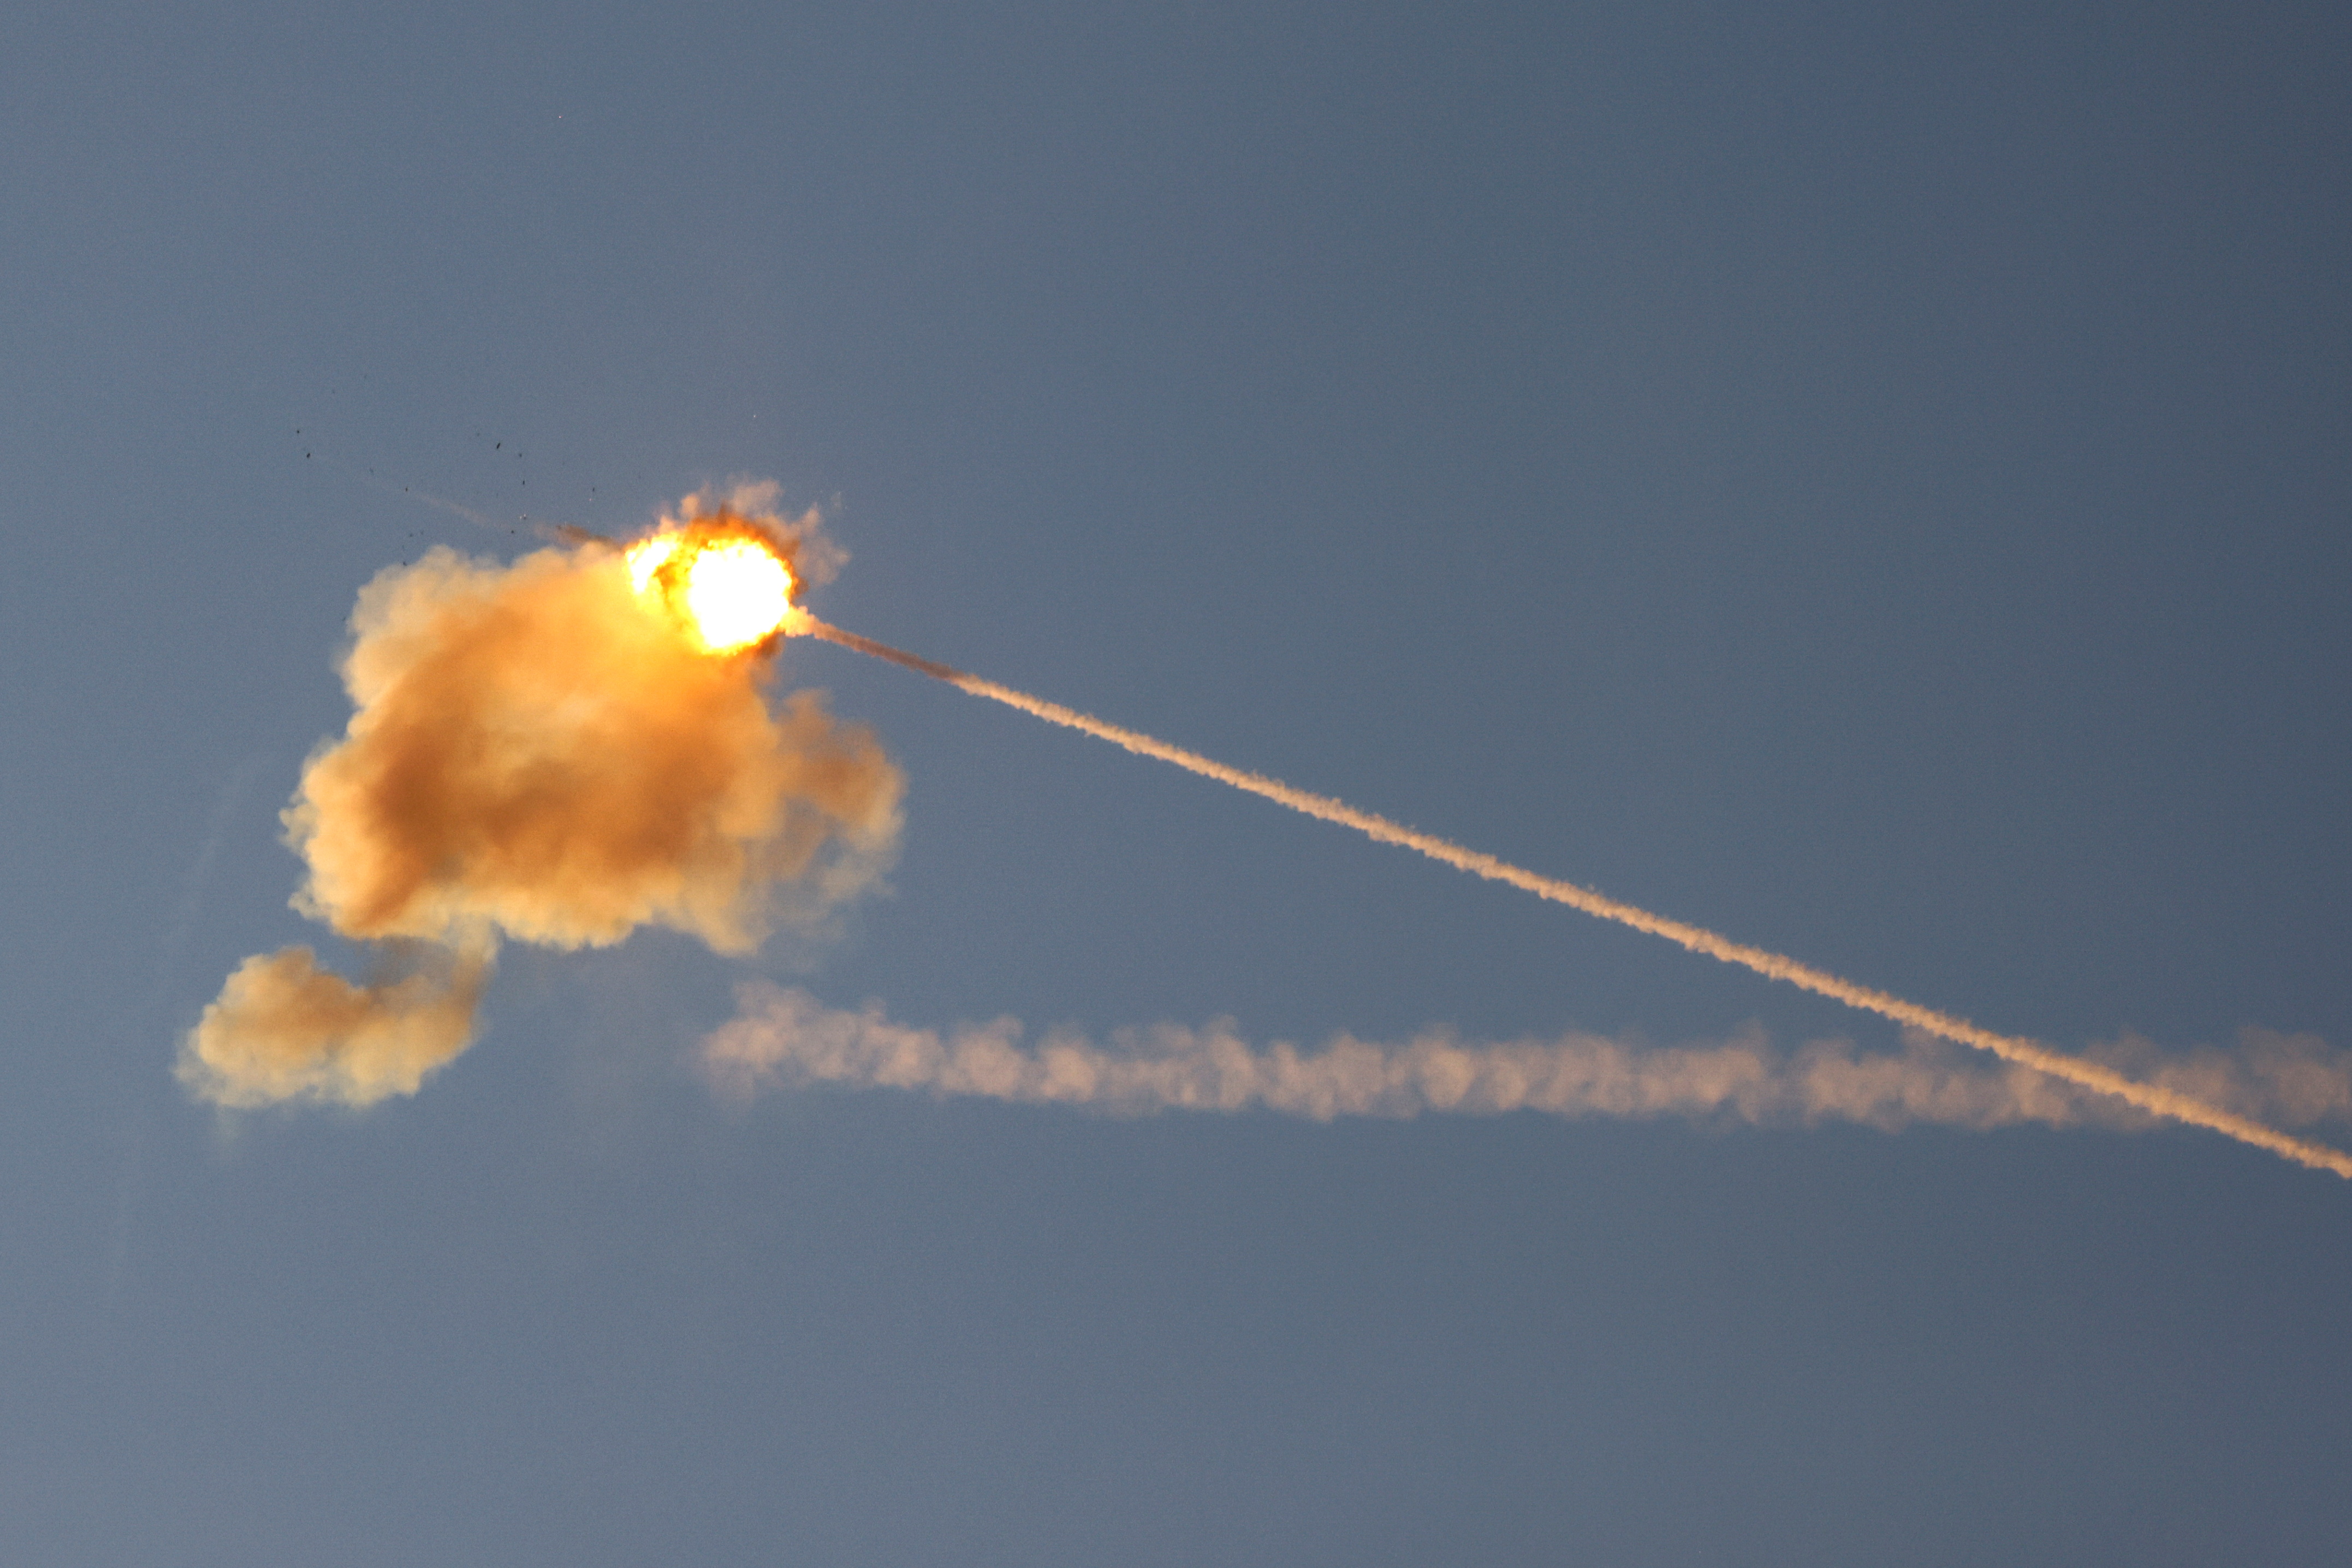 An explosion is seen midair as Israel's Iron Dome anti-missile system intercepts a rocket launched from the Gaza Strip May 17, 2021. REUTERS/Amir Cohen